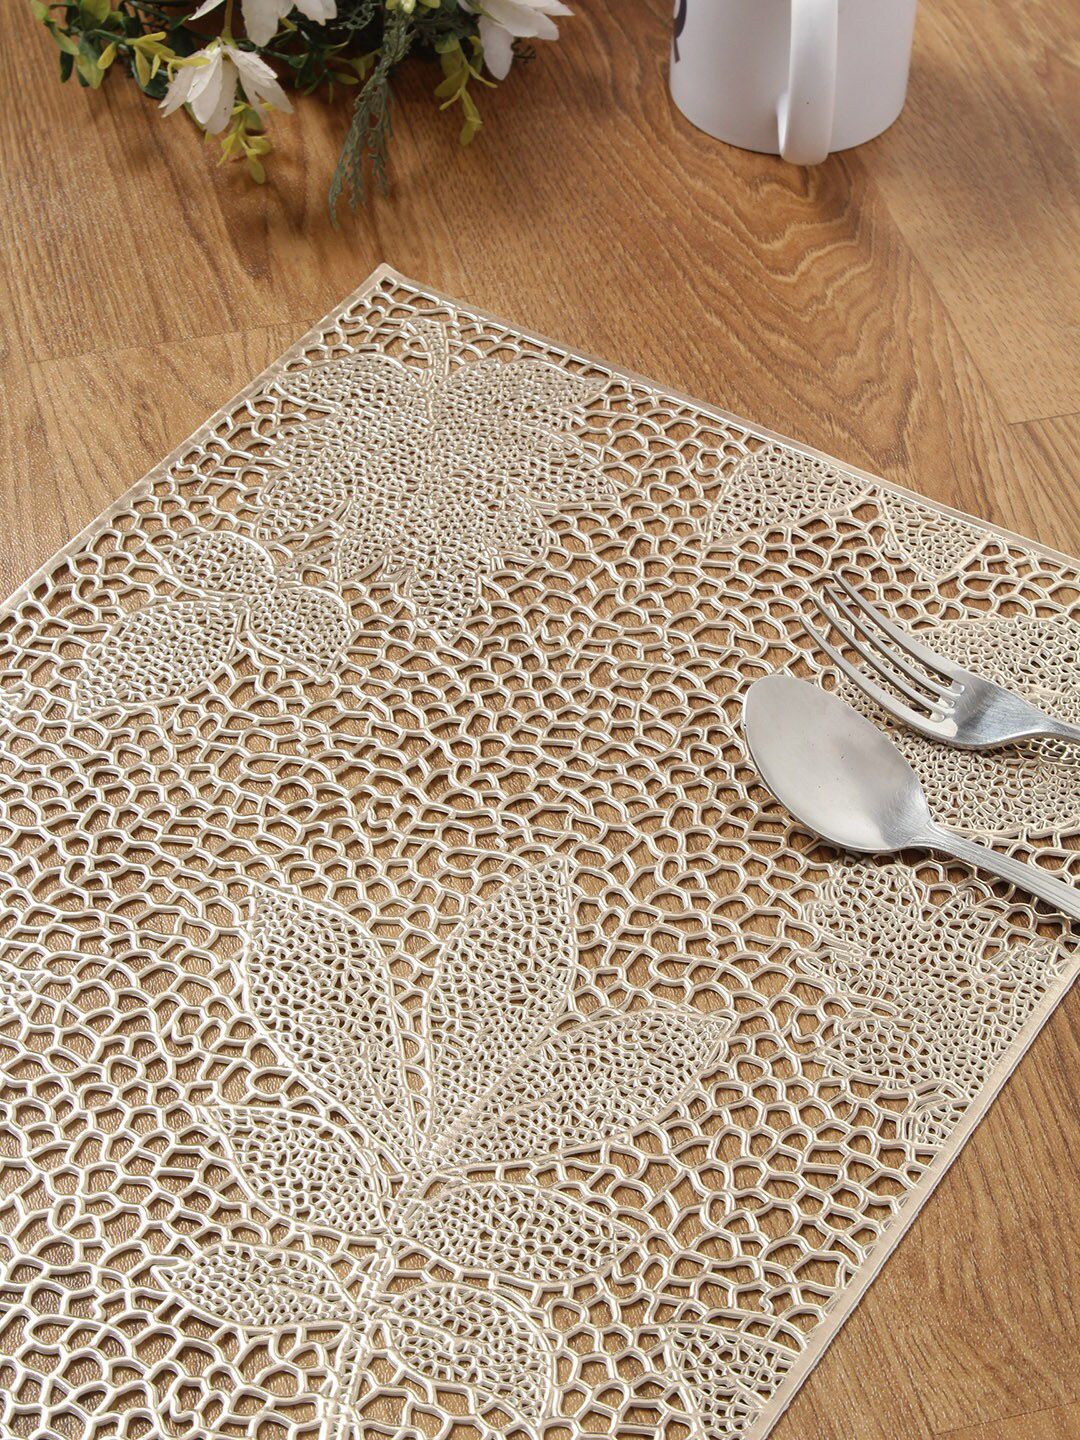 HOSTA HOMES Set Of 6 Gold-Toned Textured Table Placemats Price in India